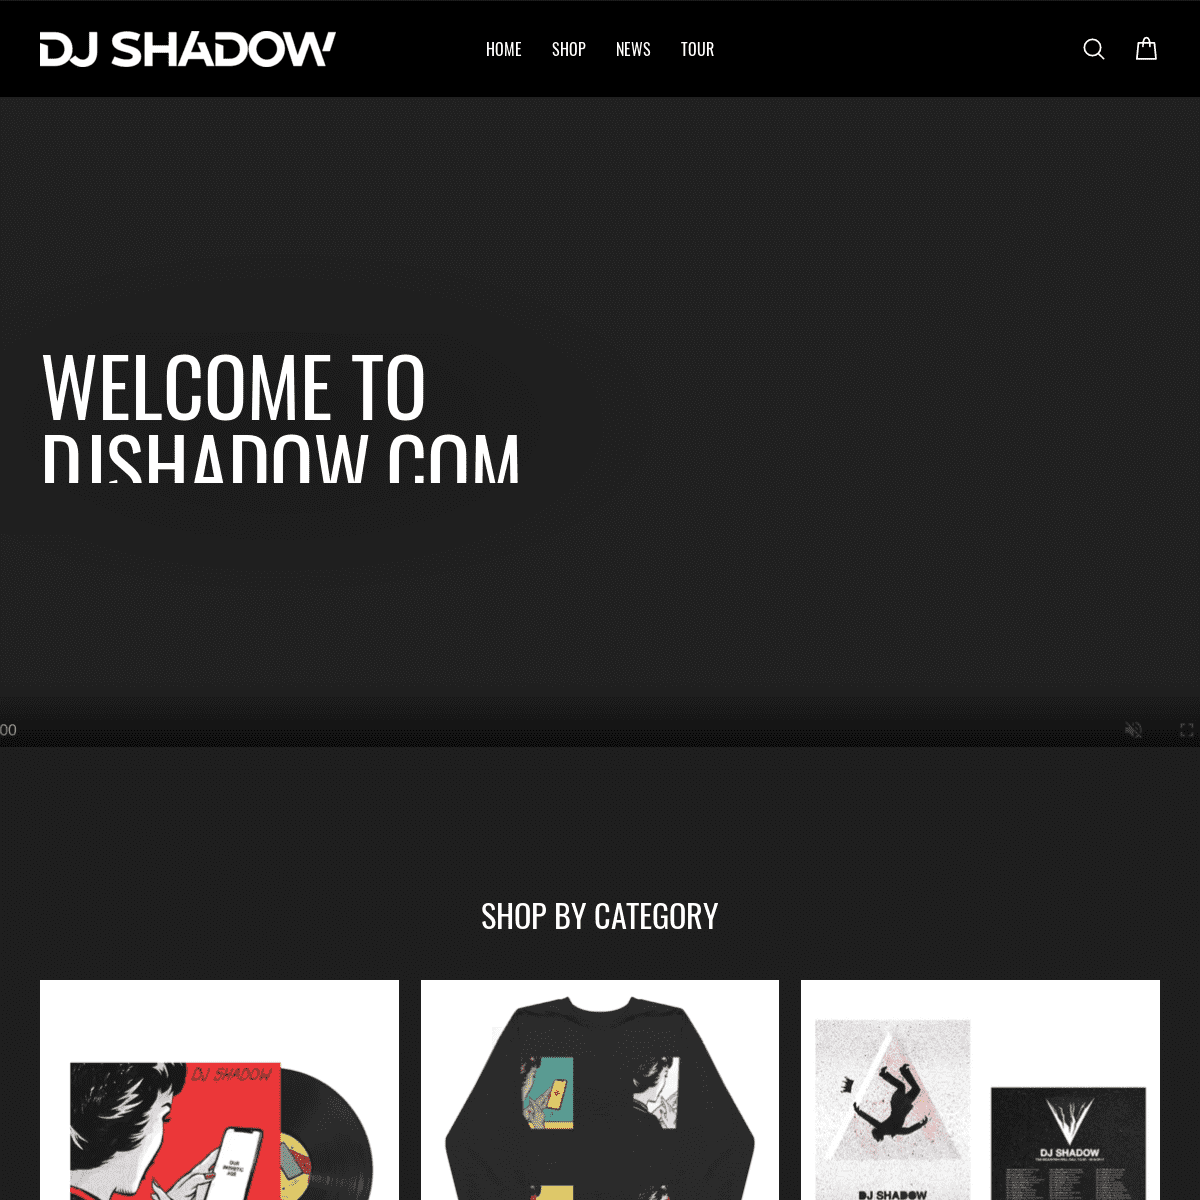 A complete backup of https://djshadow.com